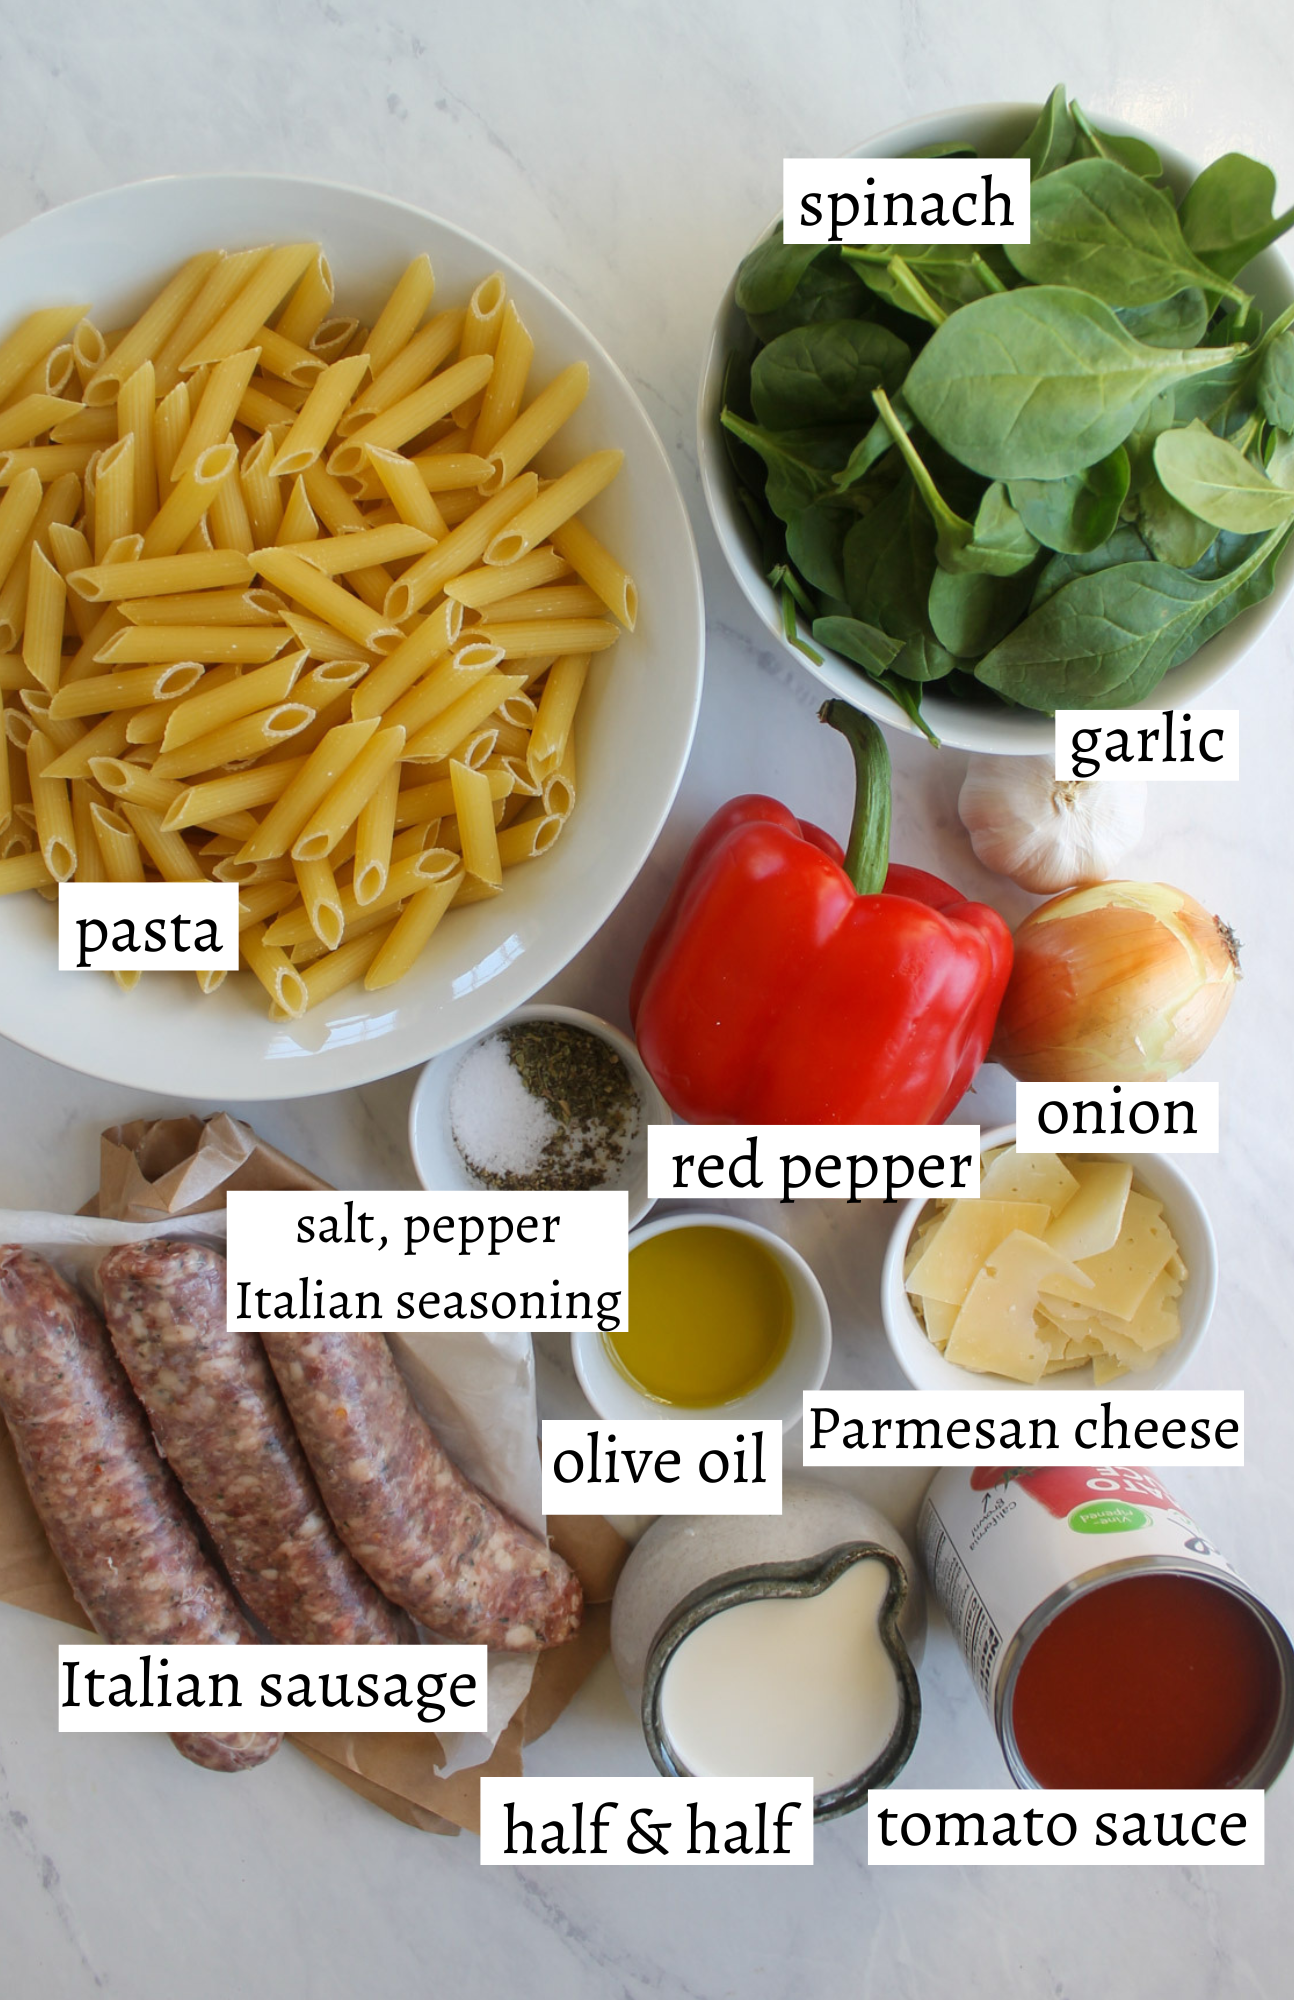 Labeled Ingredients for Creamy Tomato Pink Sauce Pasta with Italian Sausage.